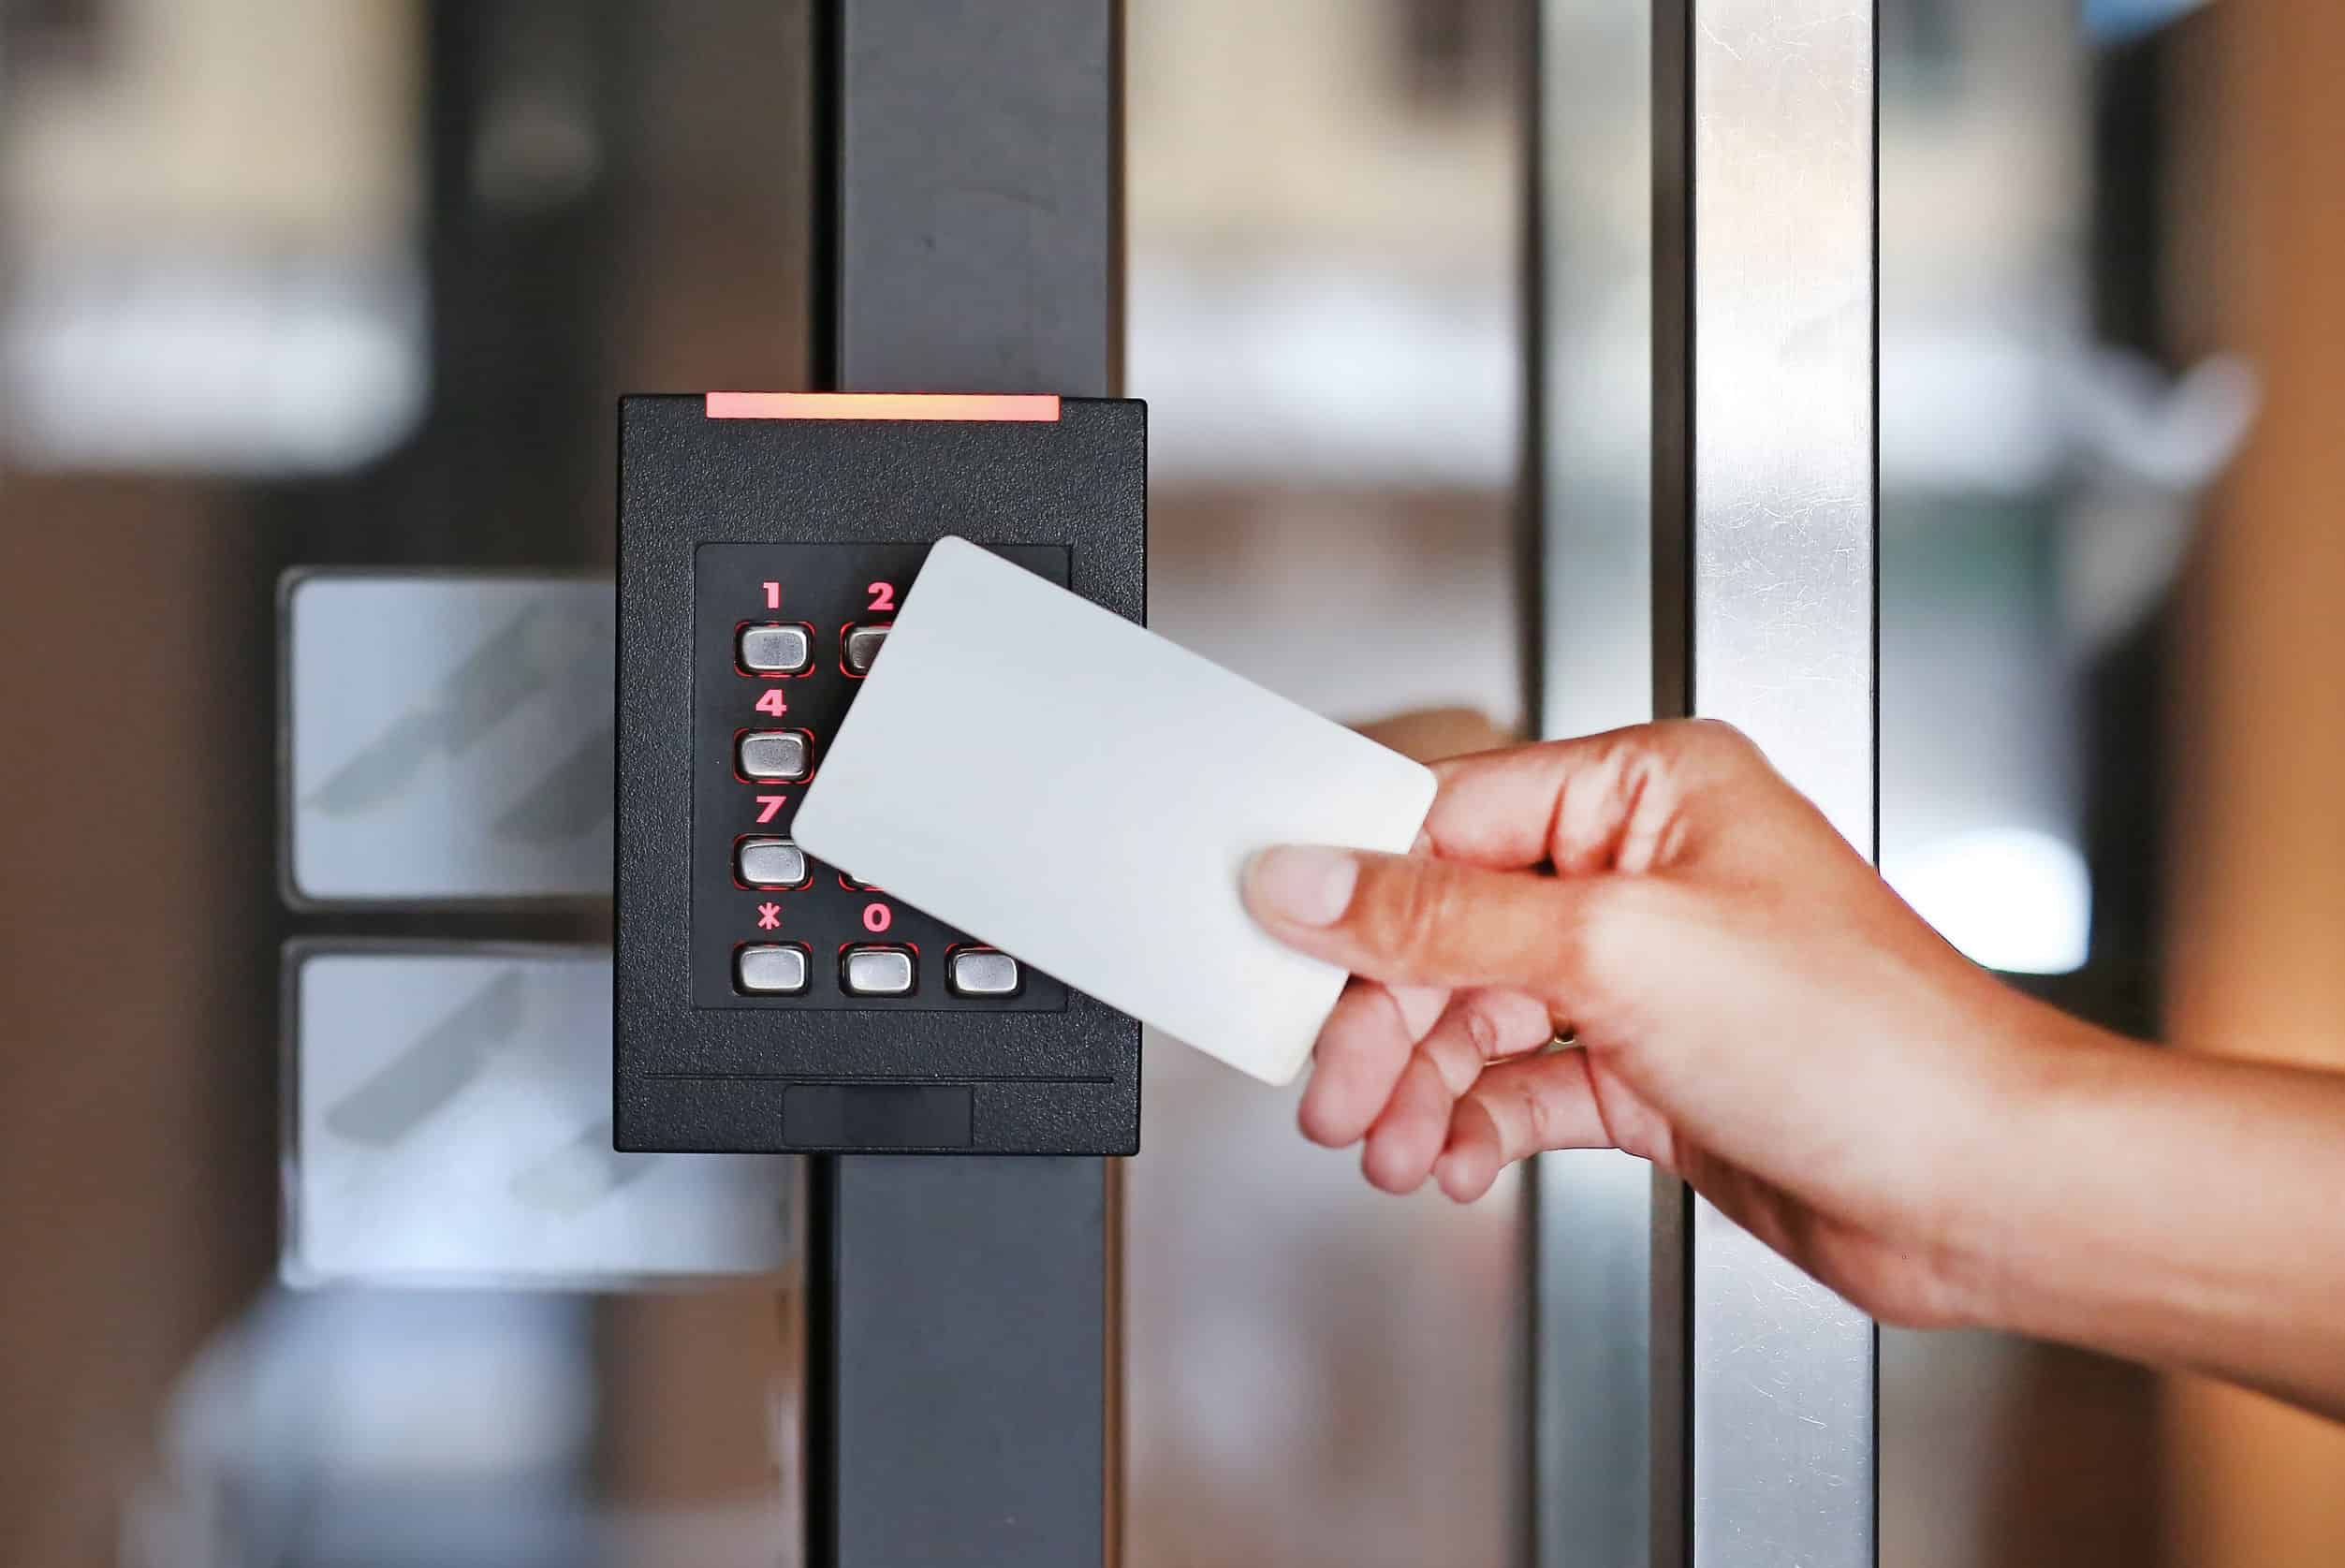 Key card being held up to security card reader